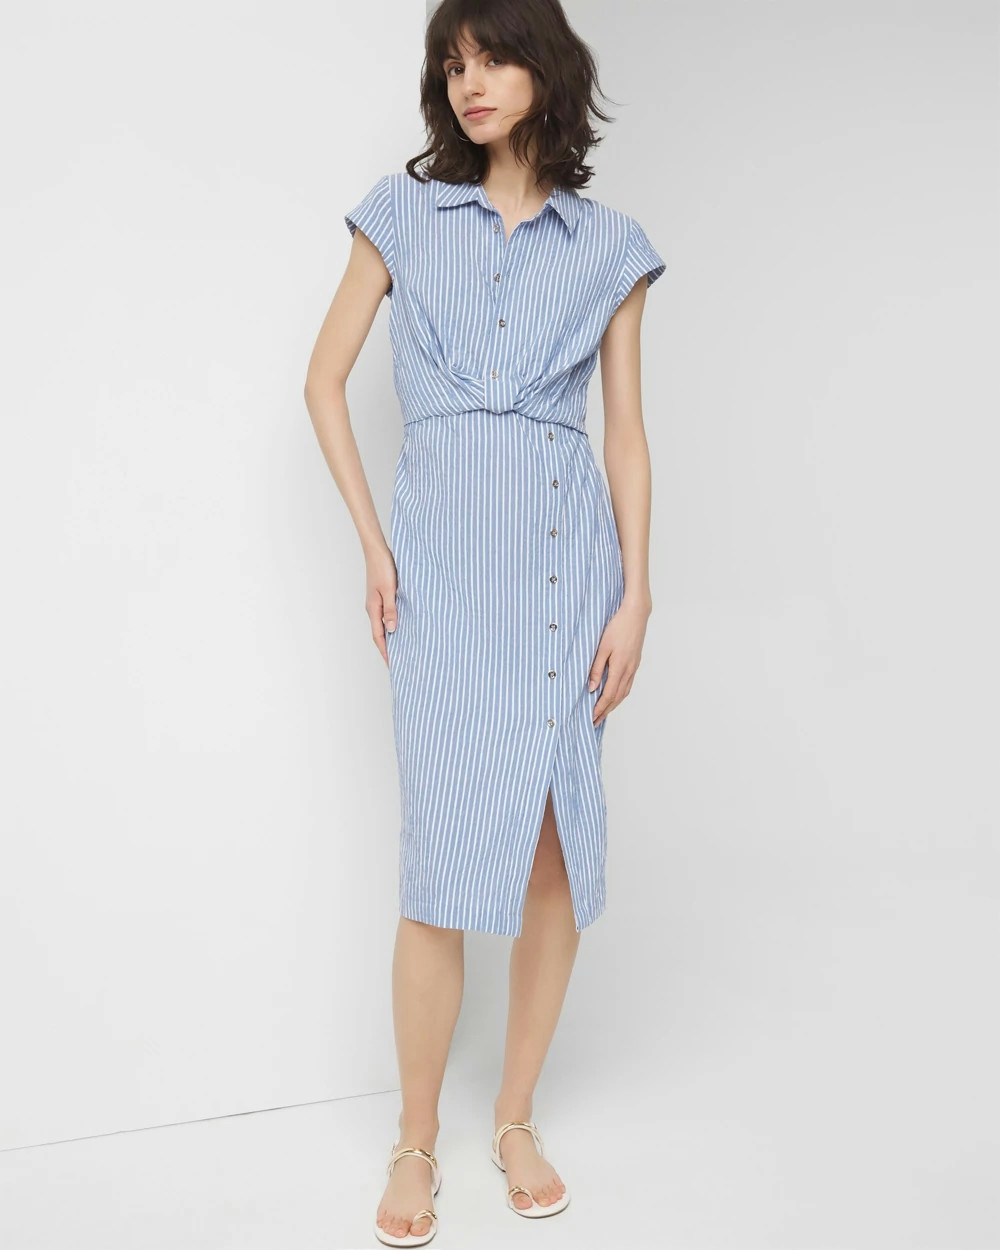 White House Black Market Short Sleeve Button Detail Dress In Blue And White Yd Stripe